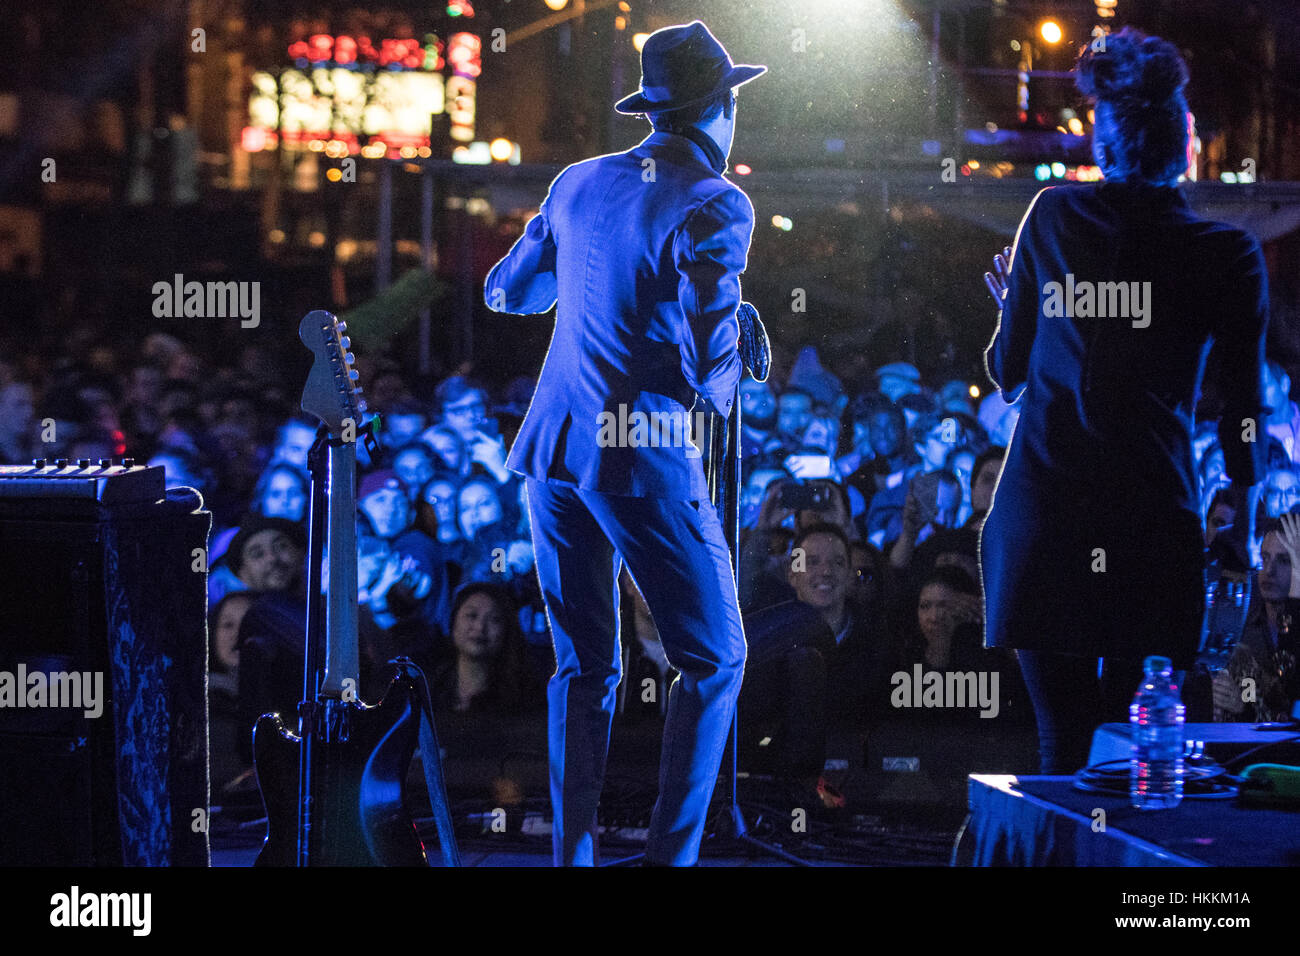 Los Angeles, California, USA. 28th Jan, 2017. Music artist Mayer Hawthorne performs on stage at the 'Night on Broadway' arts and music festival in downtown Los Angeles, California, USA, on January 28th, 2017. Credit: Sheri Determan/Alamy Live News Stock Photo